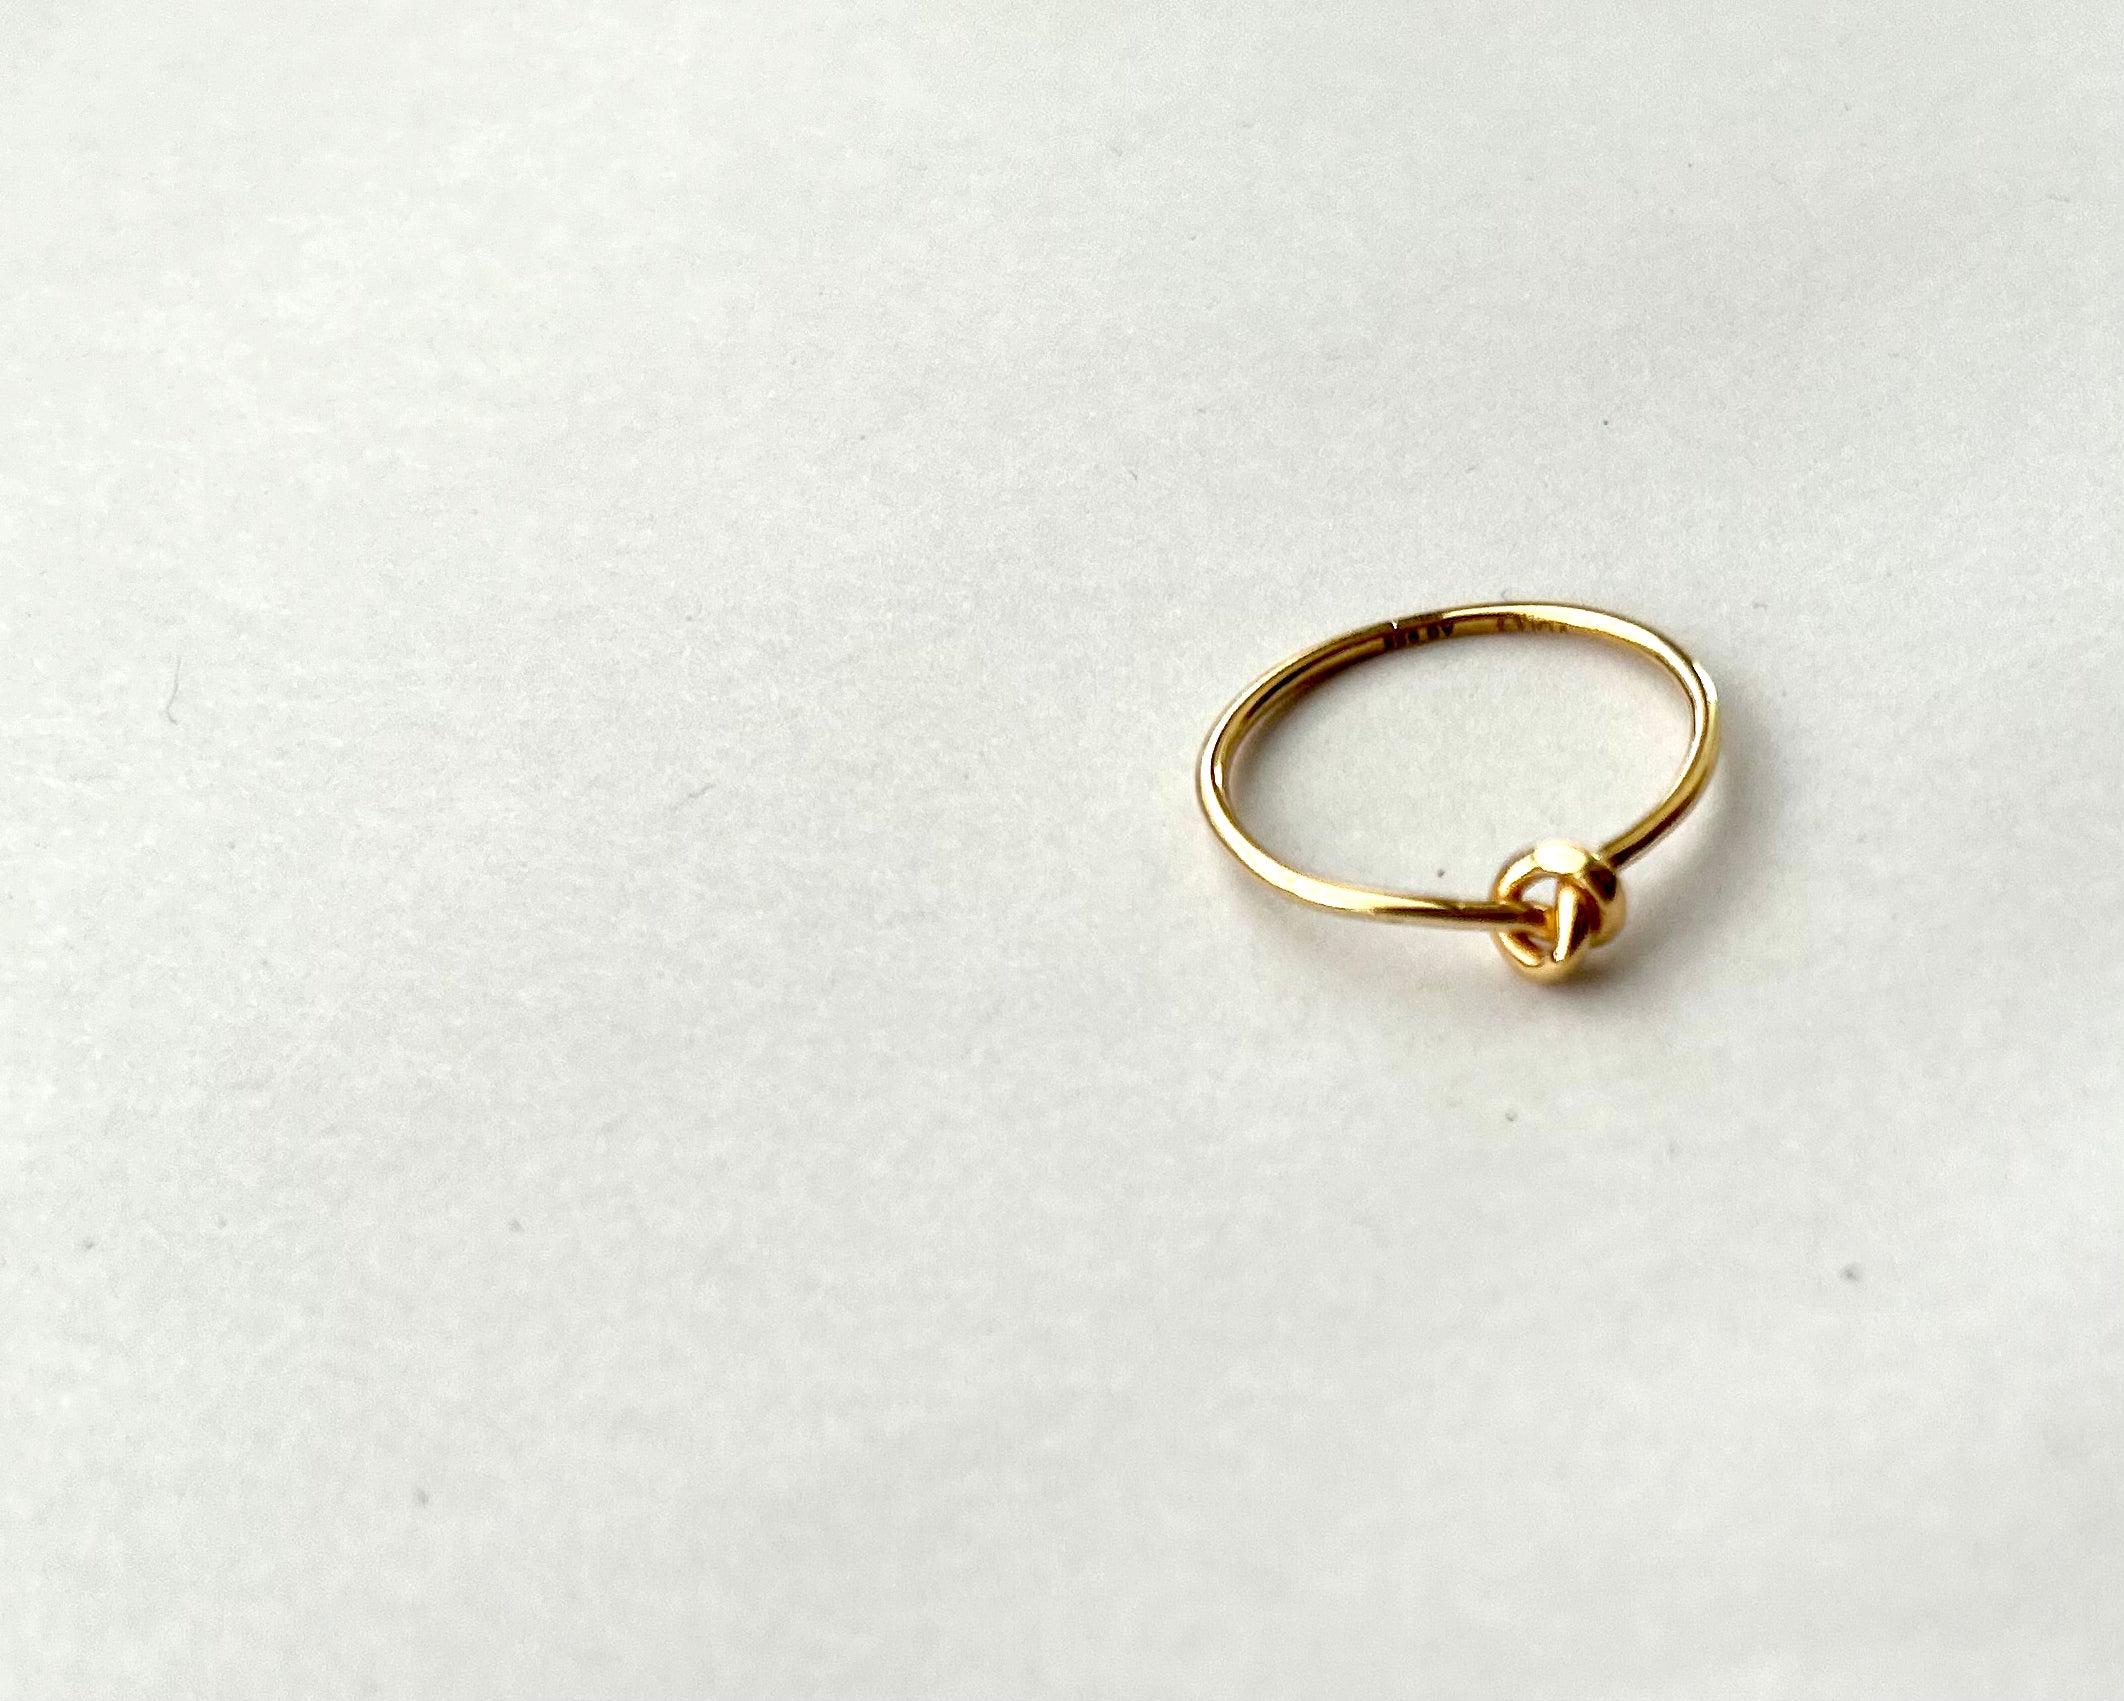 ESSENTIALS “Forget me Knot” Ring